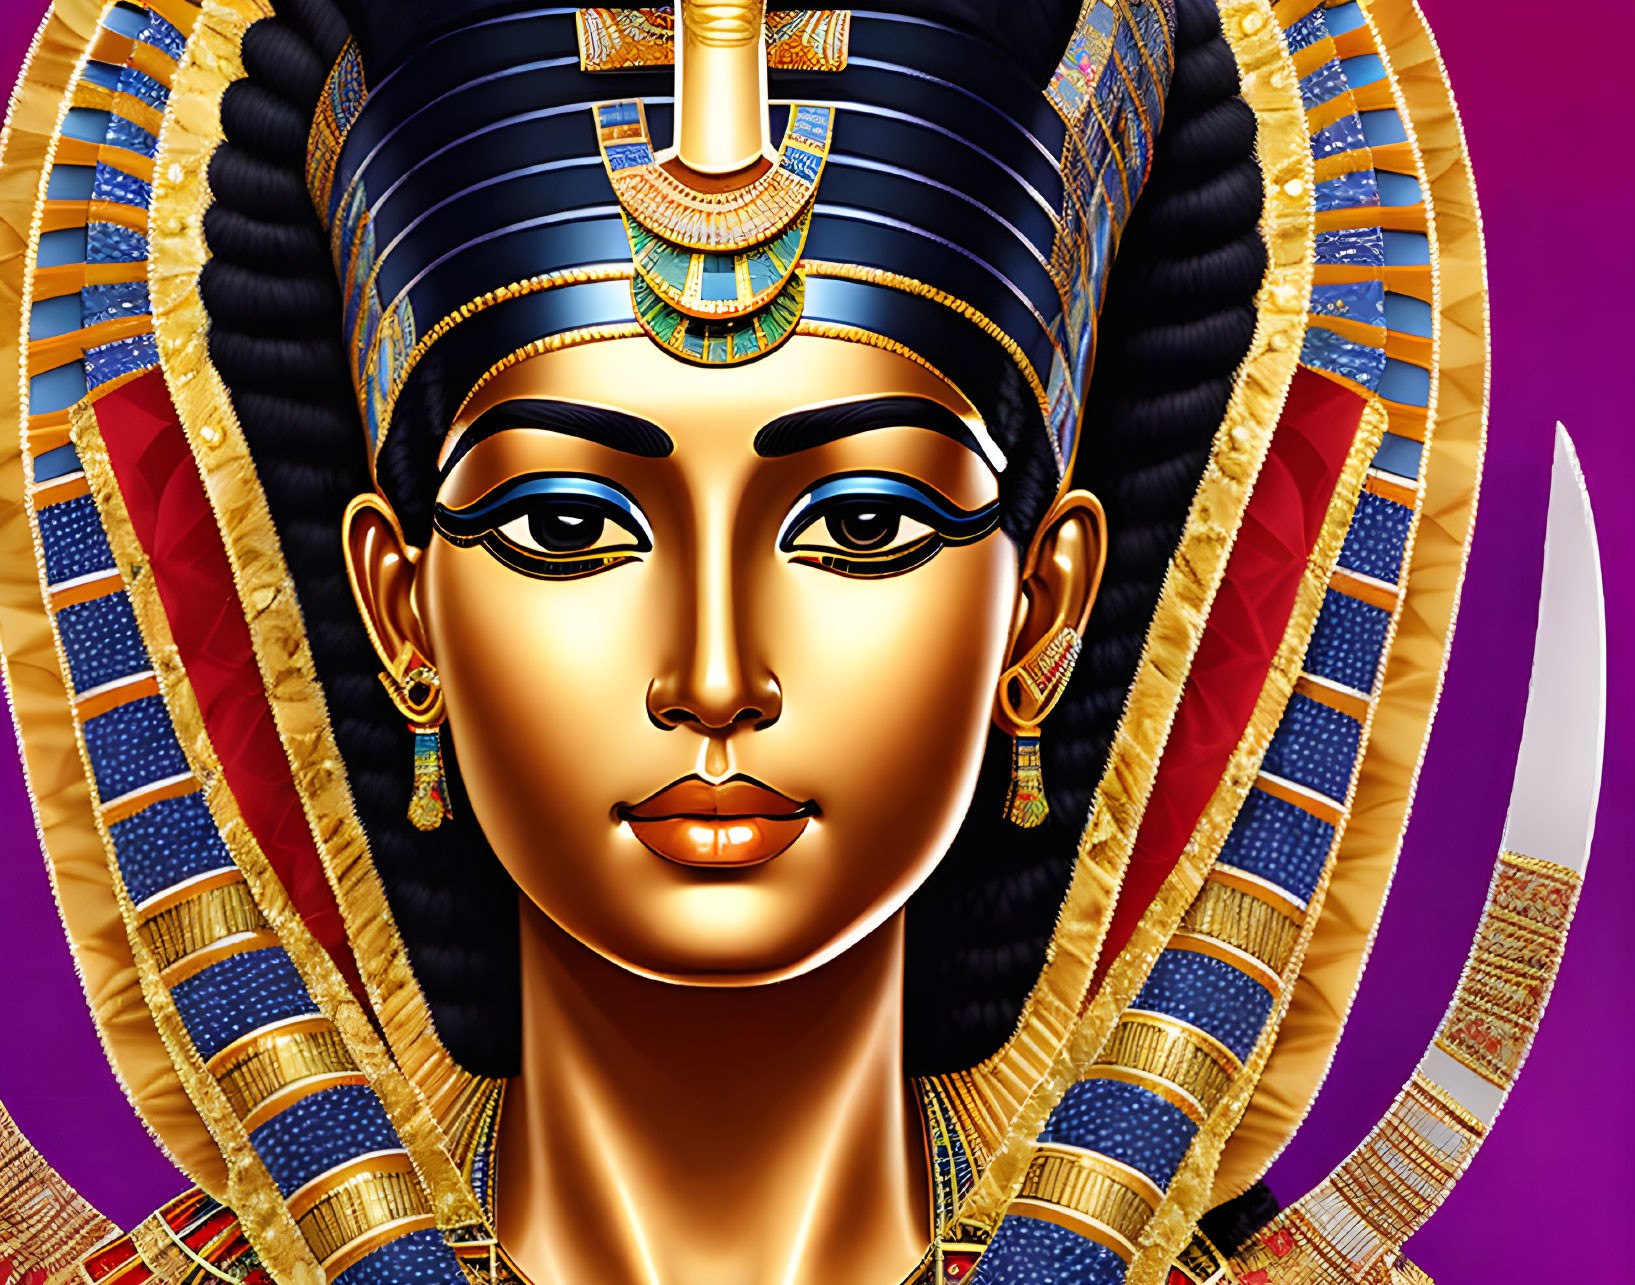 Vibrant illustration of a person with Egyptian headdress and intricate jewelry